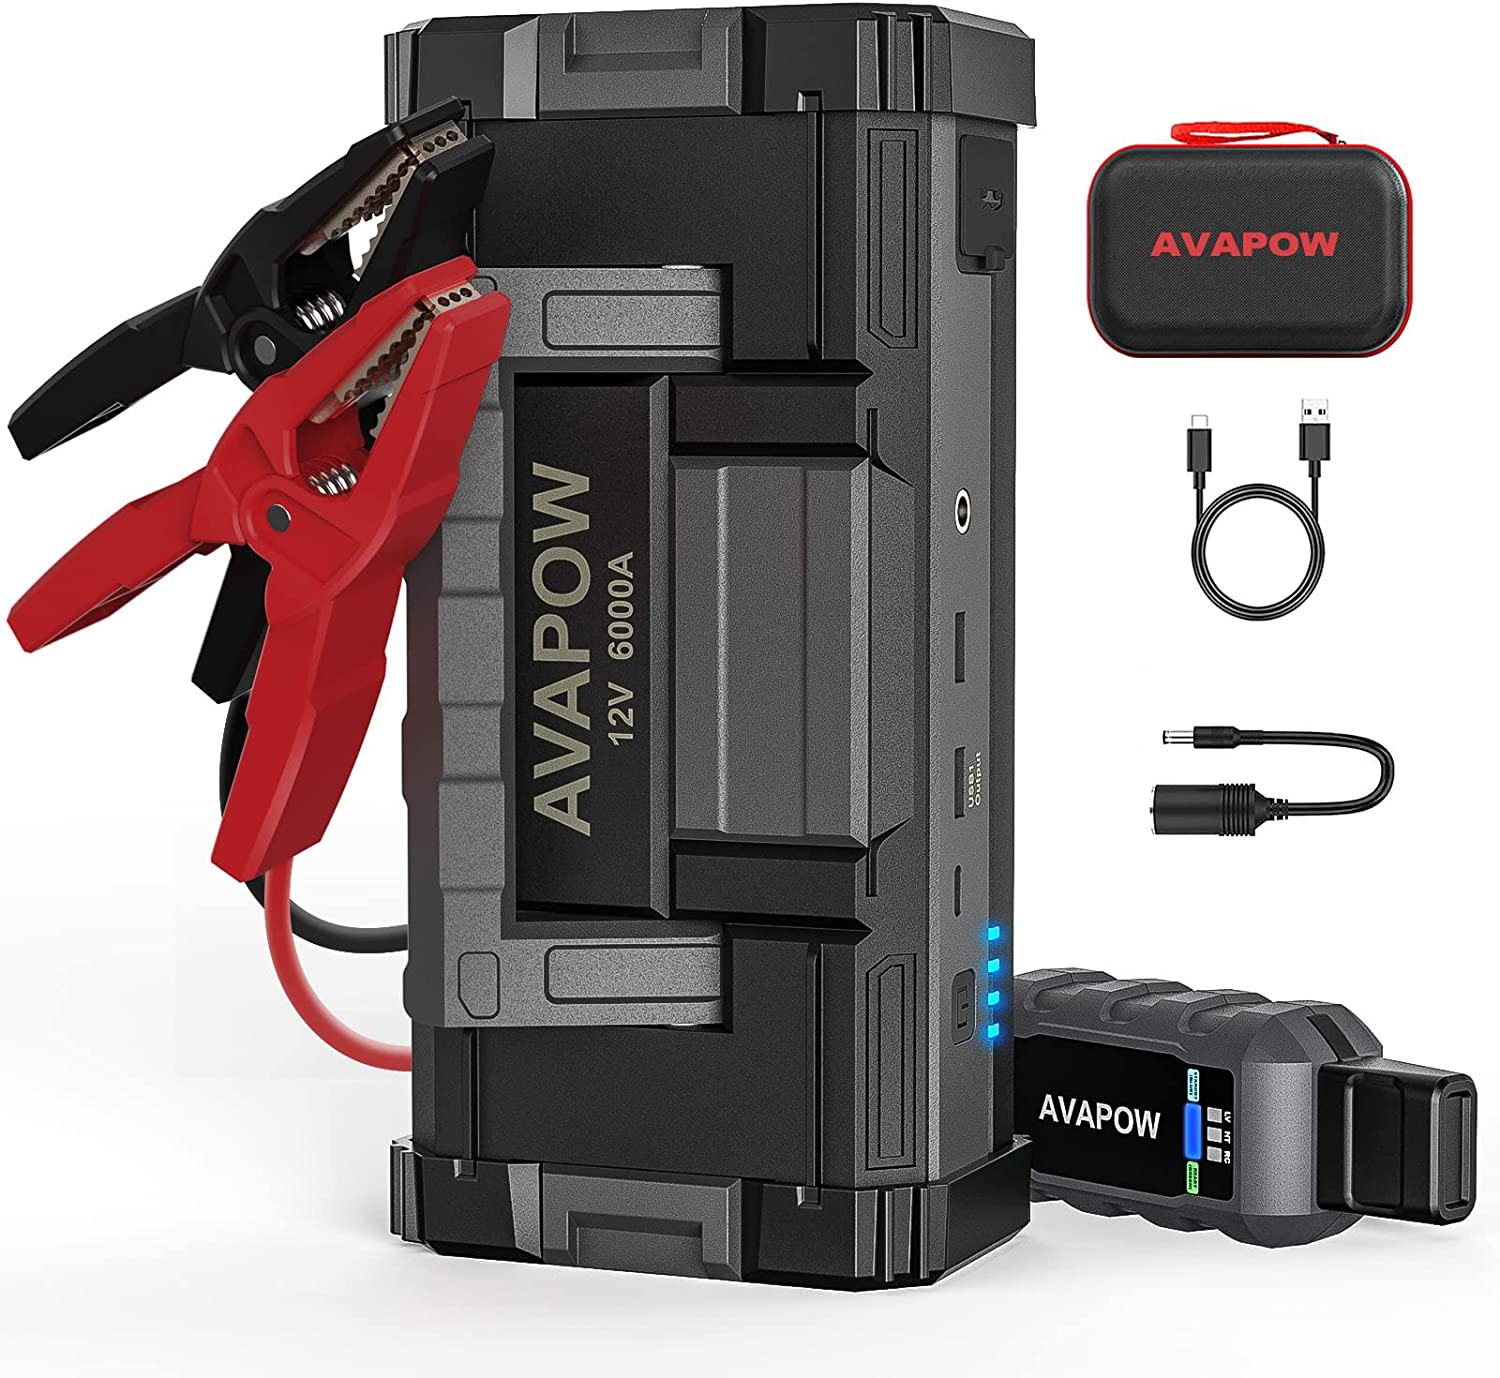 AVAPOW 6000A Car Battery Jump Starter(for All Gas or up to 12L Diesel) Powerful Car Jump Starter with Dual USB Quick Charge and DC Output,12V Jump Pack with Built-in LED Bright Light - image 1 of 8